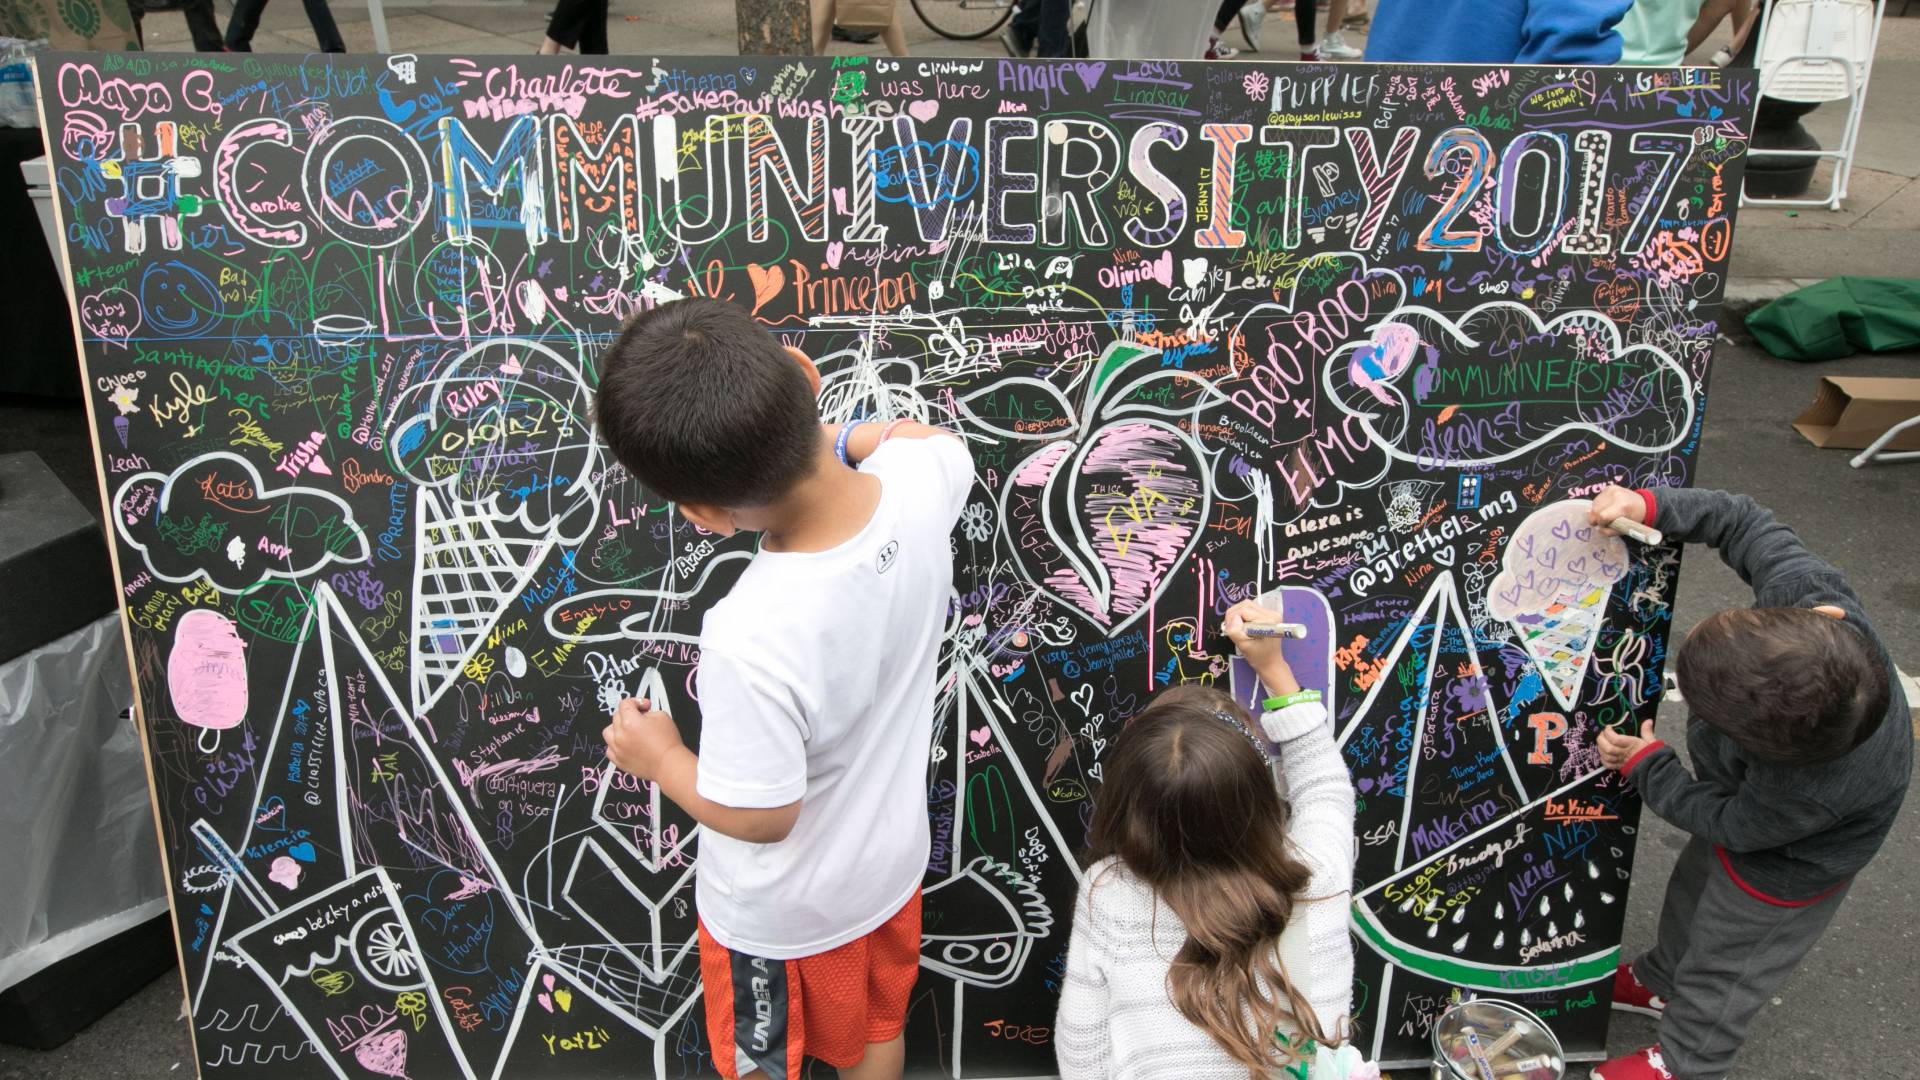 The annual Communiversity Artsfest includes arts and crafts demonstrations and activities ranging from tissue paper flowers to oil painting. Above, children add their own artistic flourishes to a Communiversity sign. 